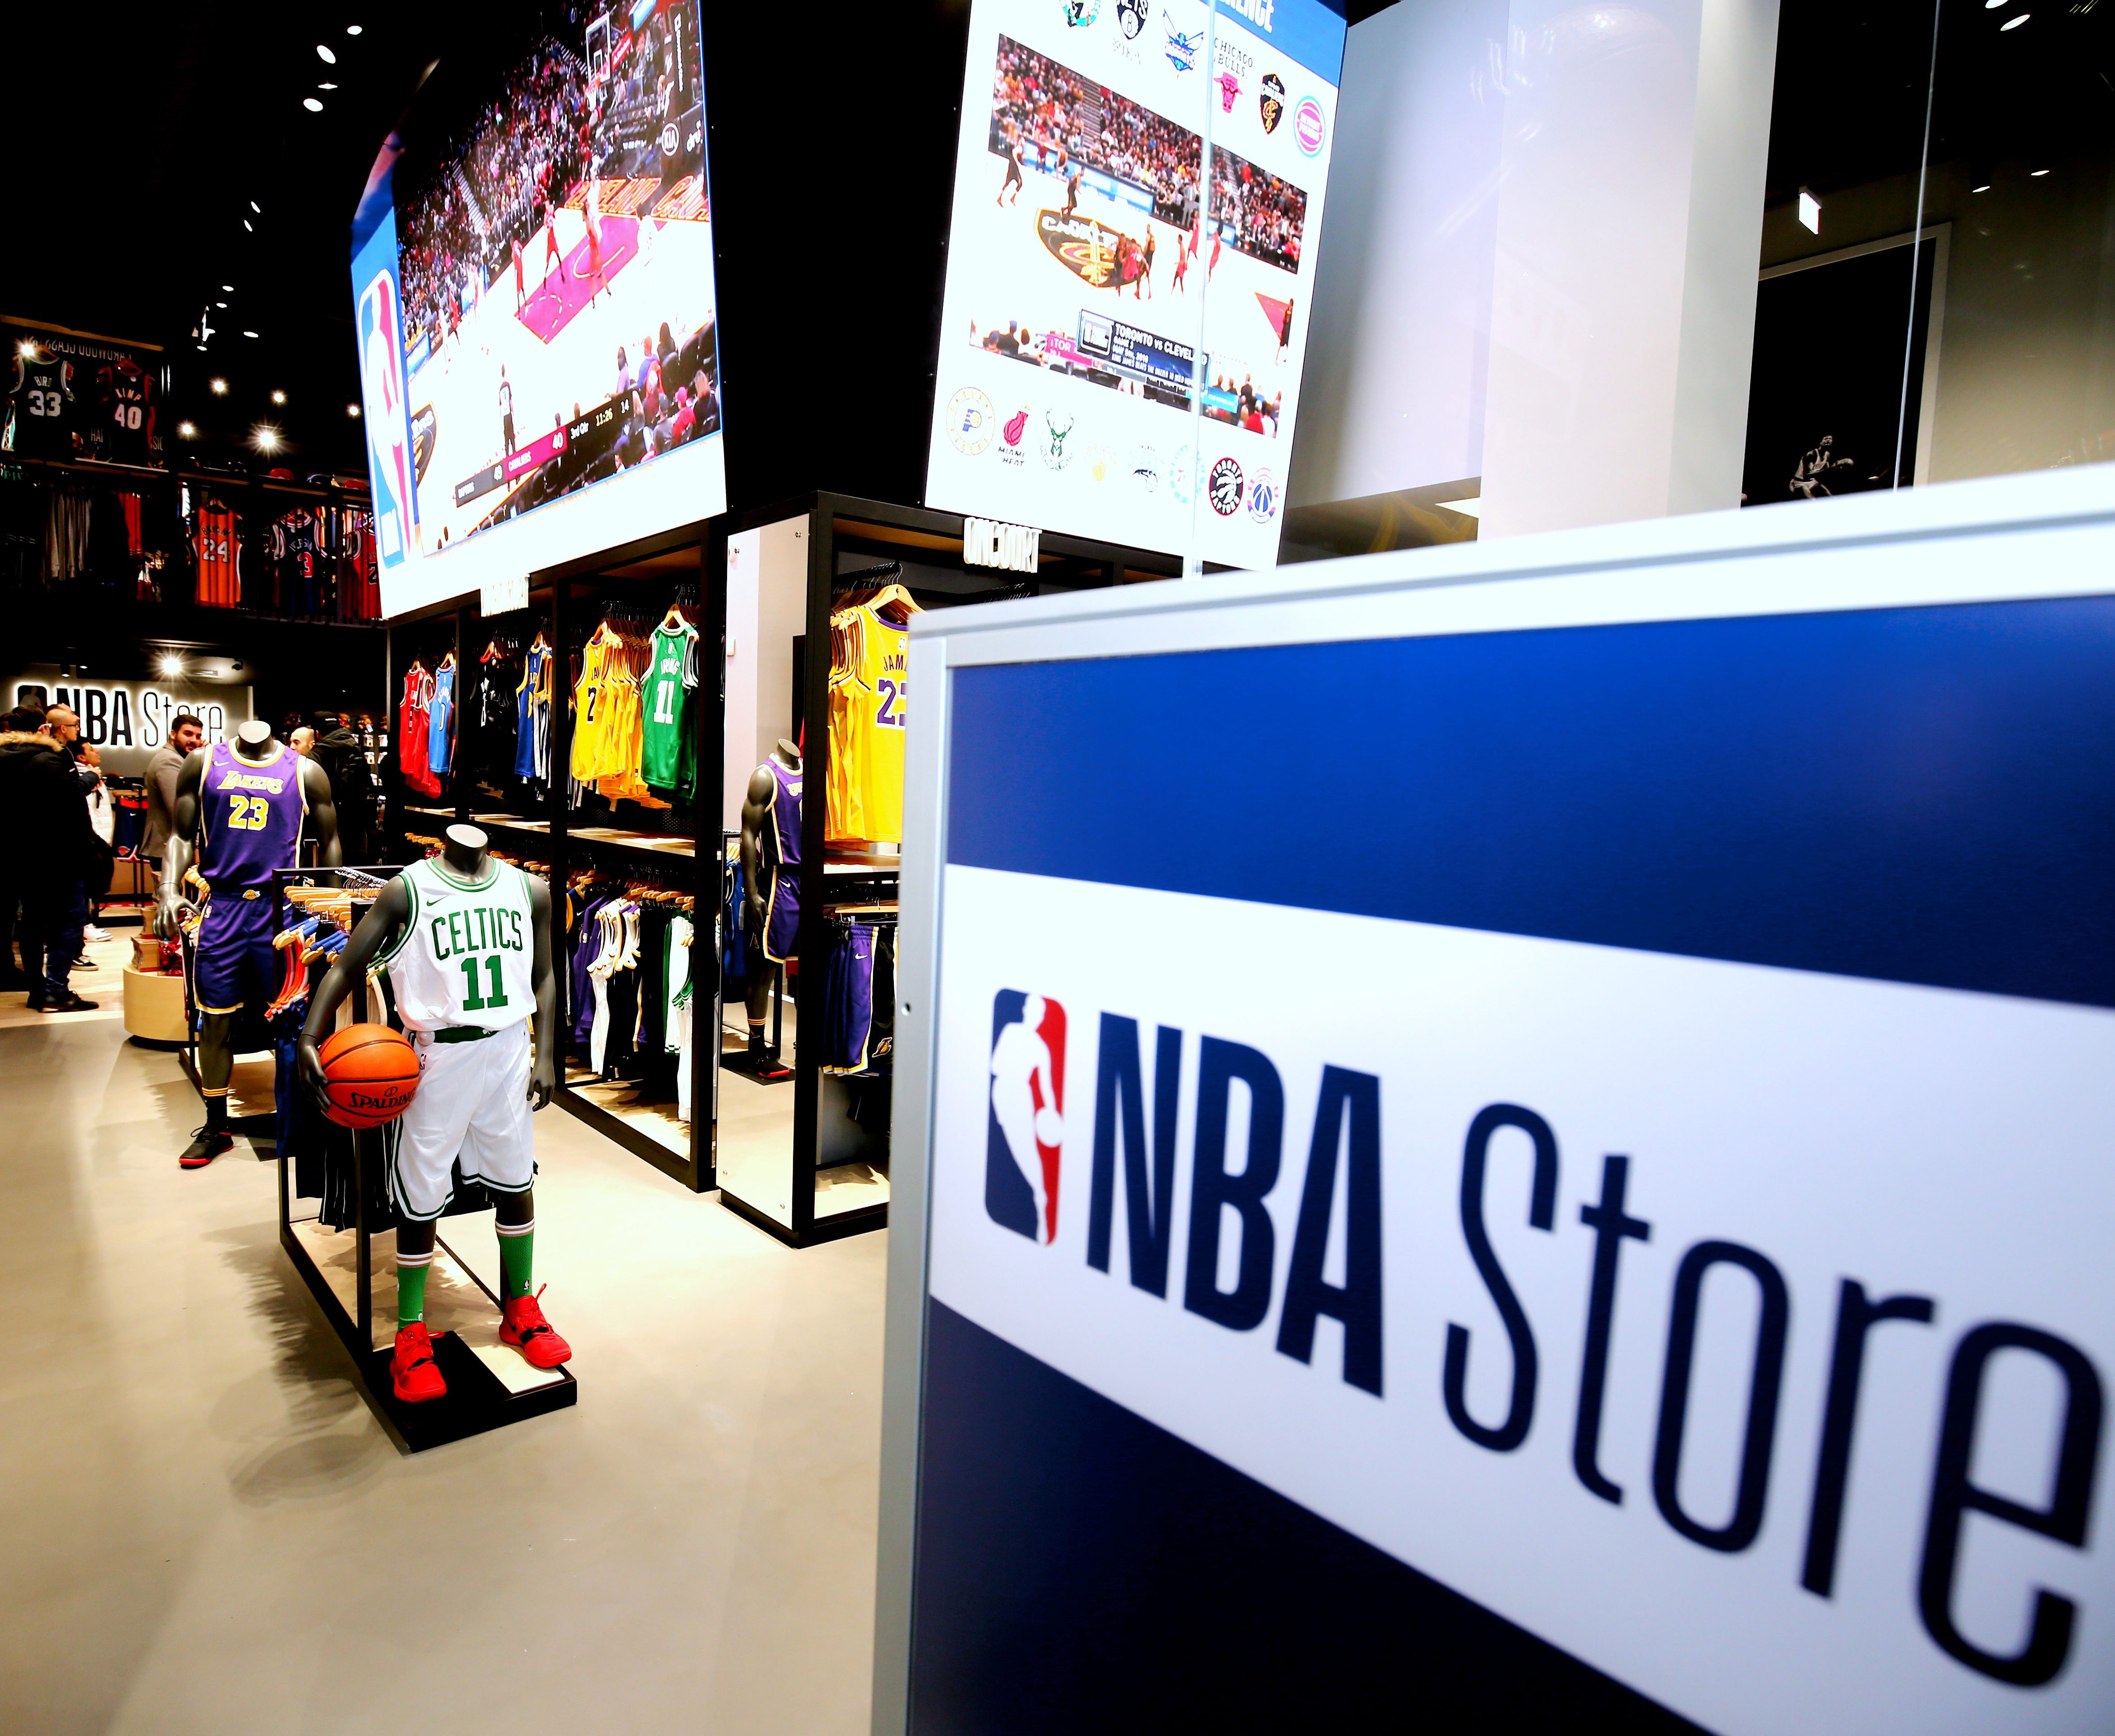 Emiliano Carchia on X: The first NBA Store in the entire Europe